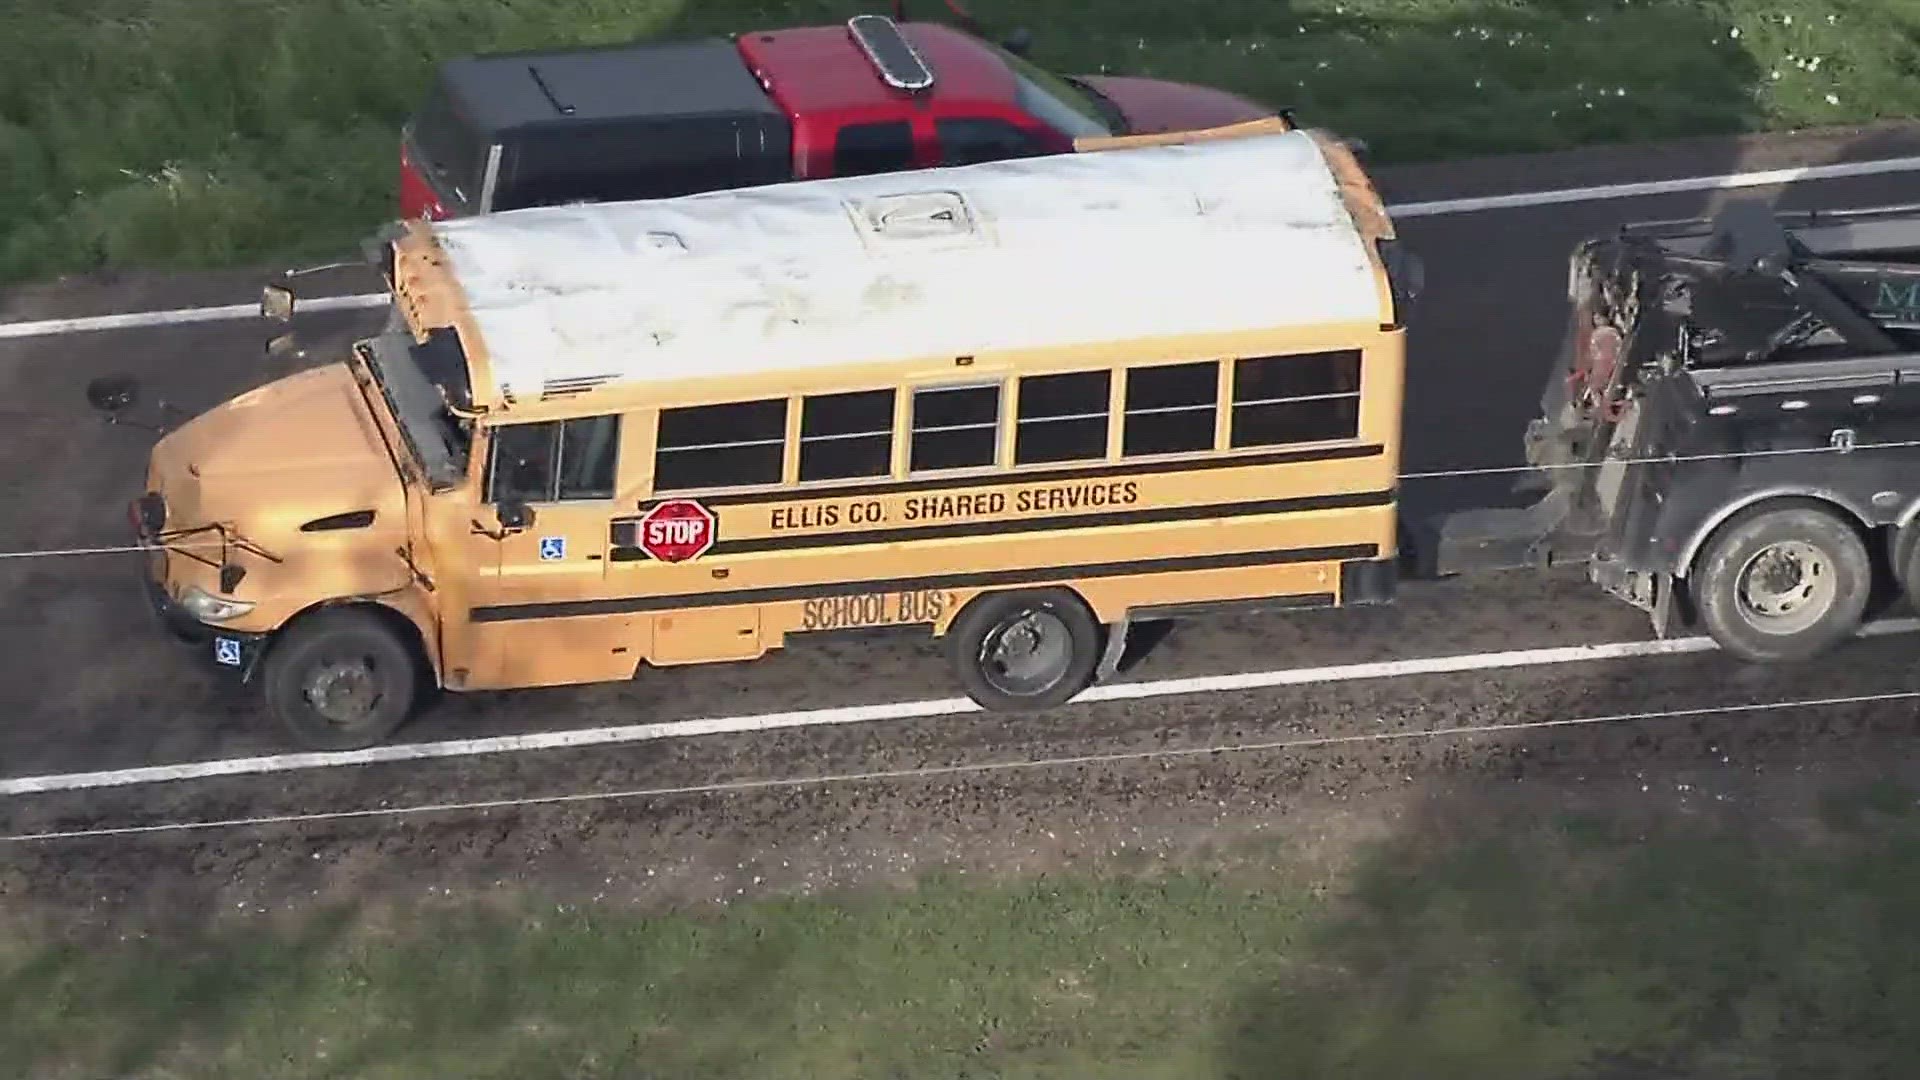 A 15-year-old student aboard the bus sustained minor injuries and was taken to the hospital for treatment.